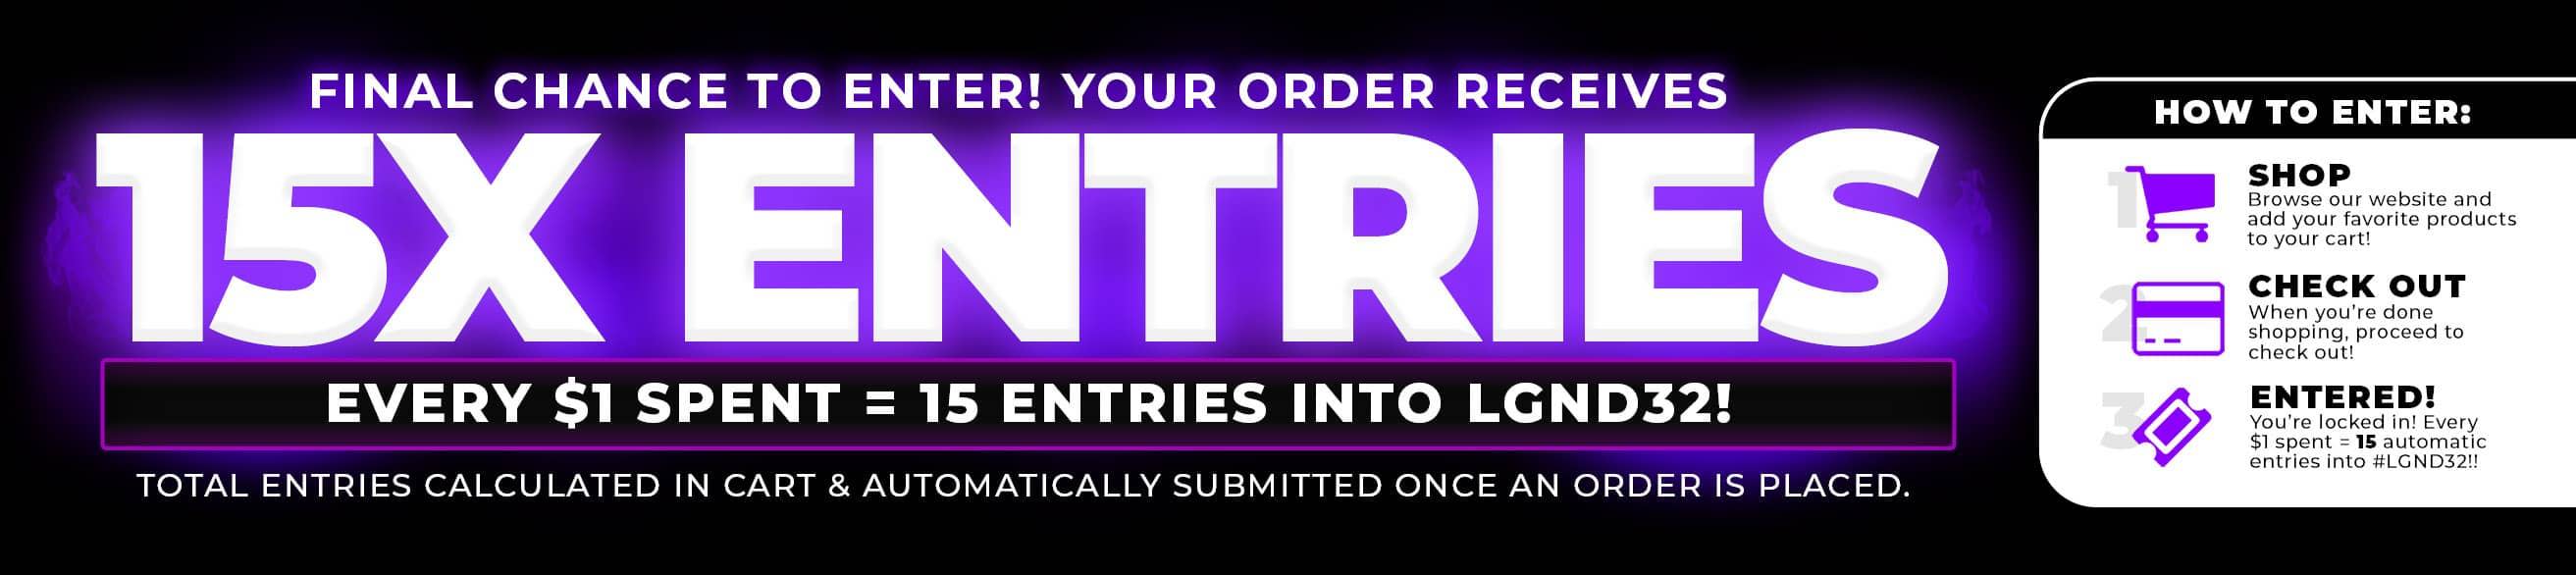 20X ENTRIES ARE LIVE NOW!  EVERY $1 YOU SPEND GETS YOU 20 ENTRIES TO WIN LGND32!!